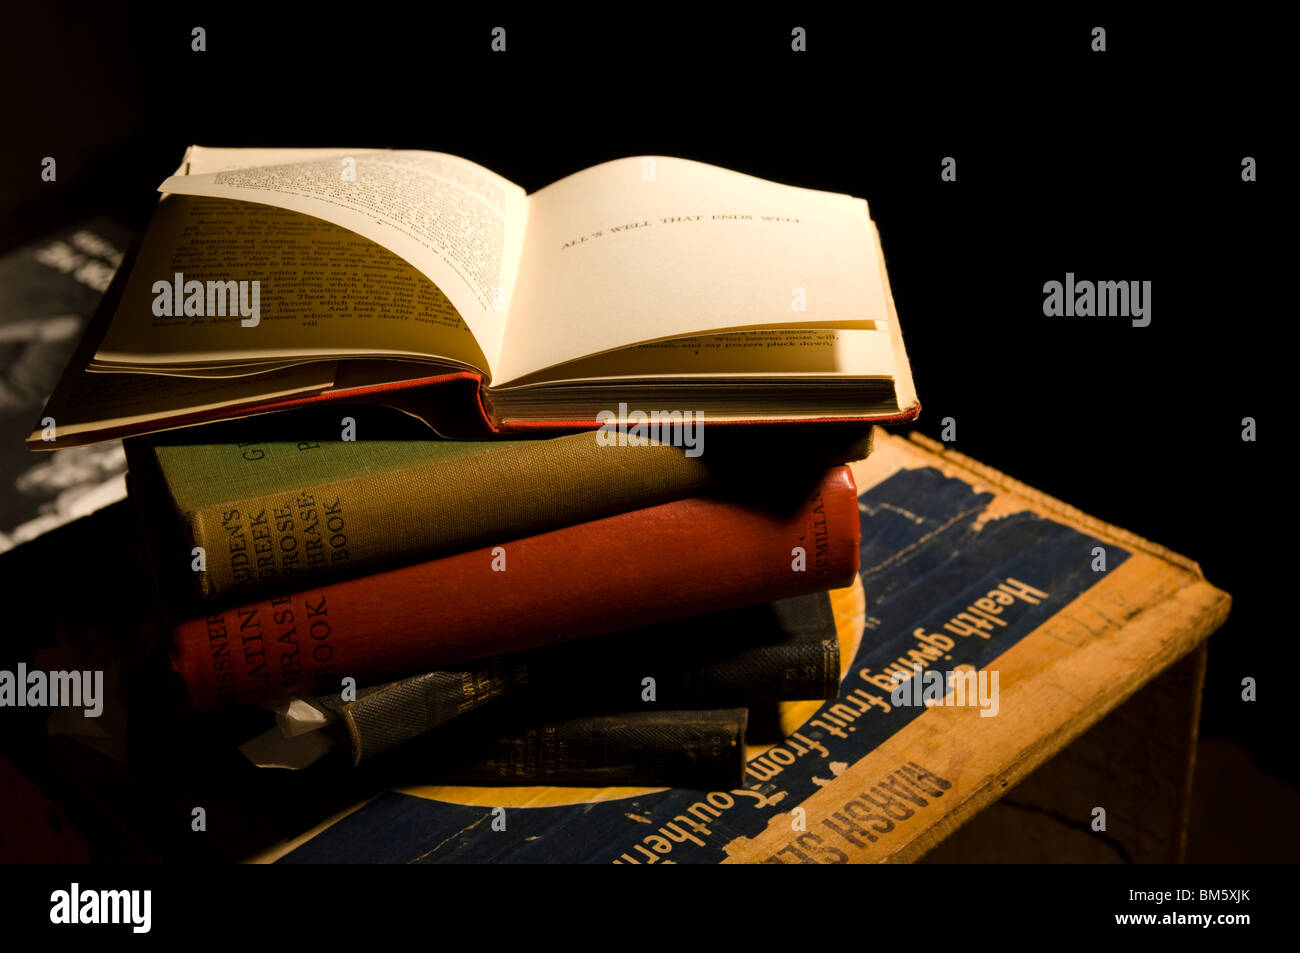 A pile of old books on a crate with top book open to show pages turning Stock Photo